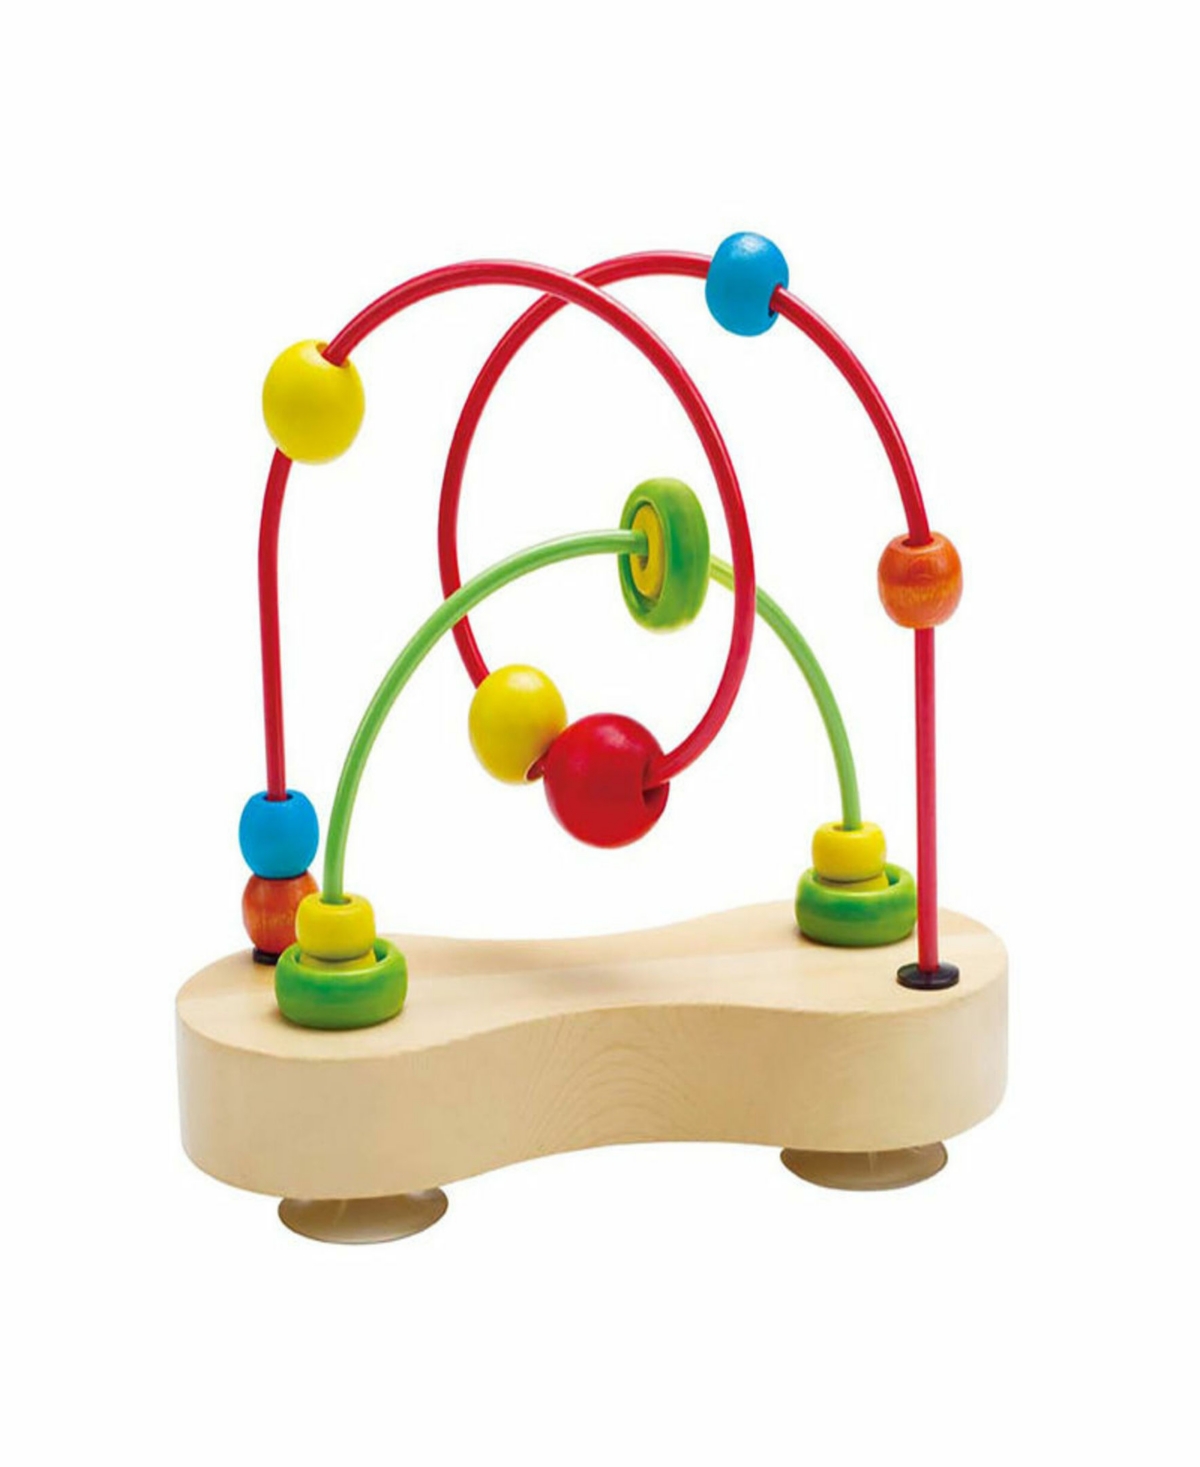 Hape Double Bubble Wooden Bead Maze Toddler Toy In Multi